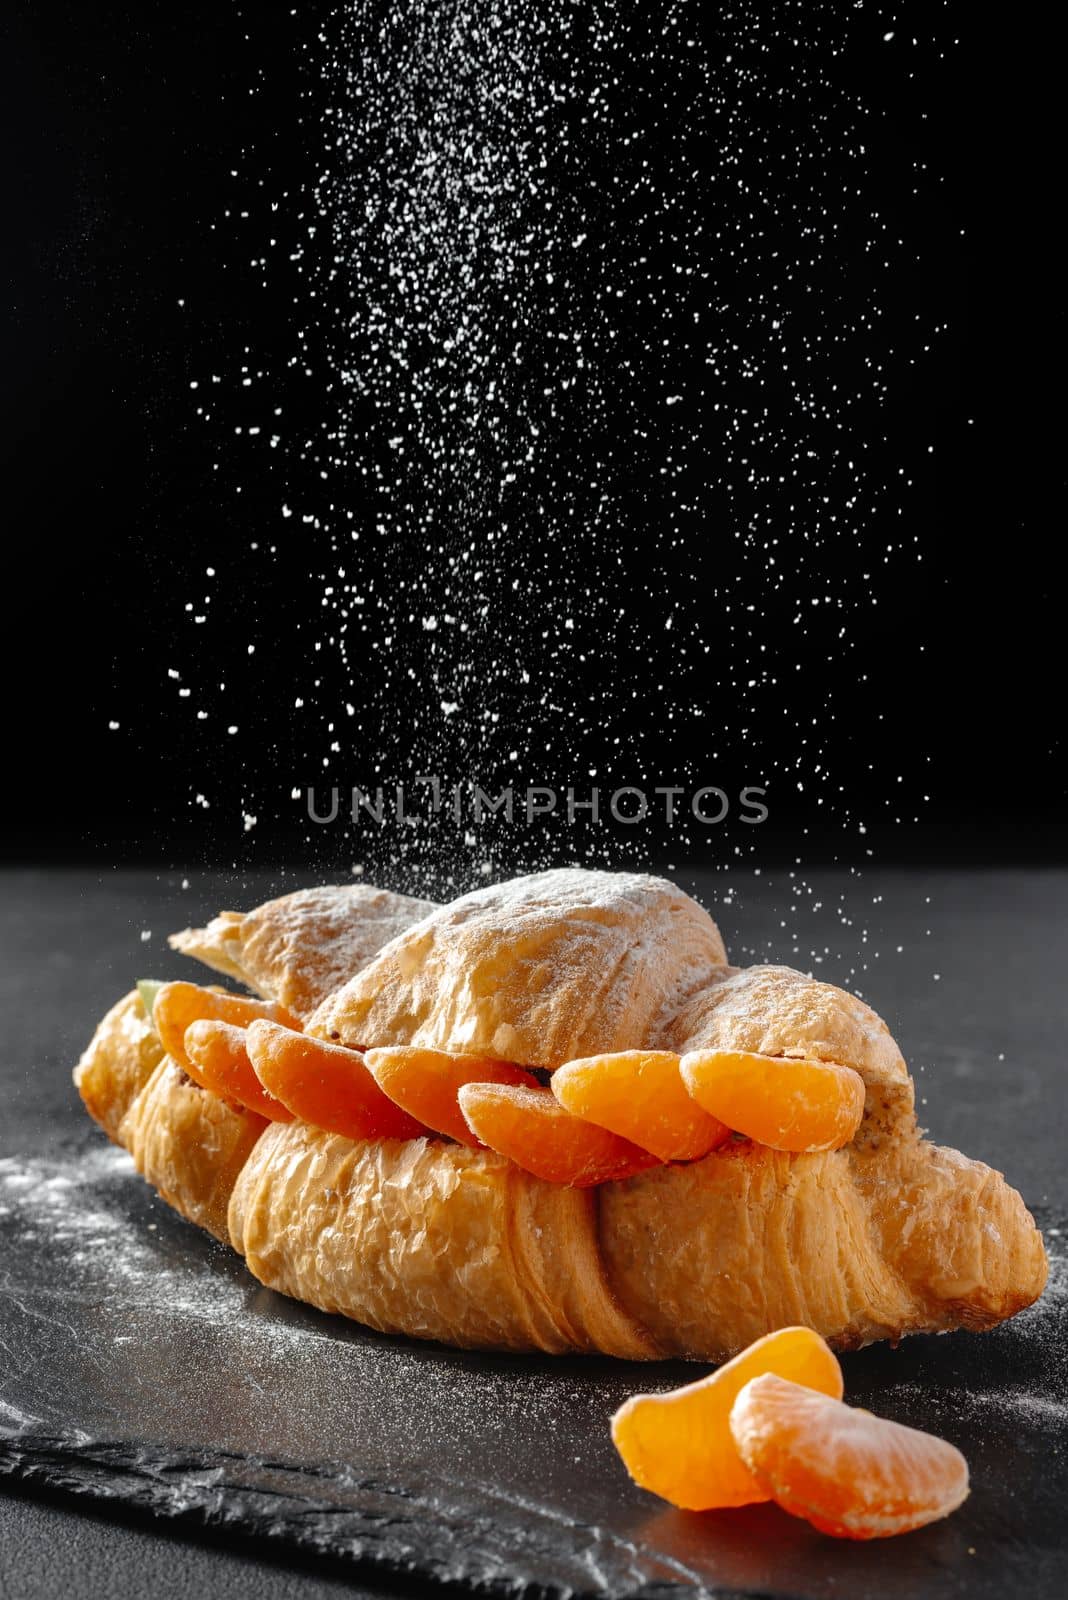 Sweet croissant sandwich with powdered sugar on a dark background. Baking and bakery concept by gulyaevstudio